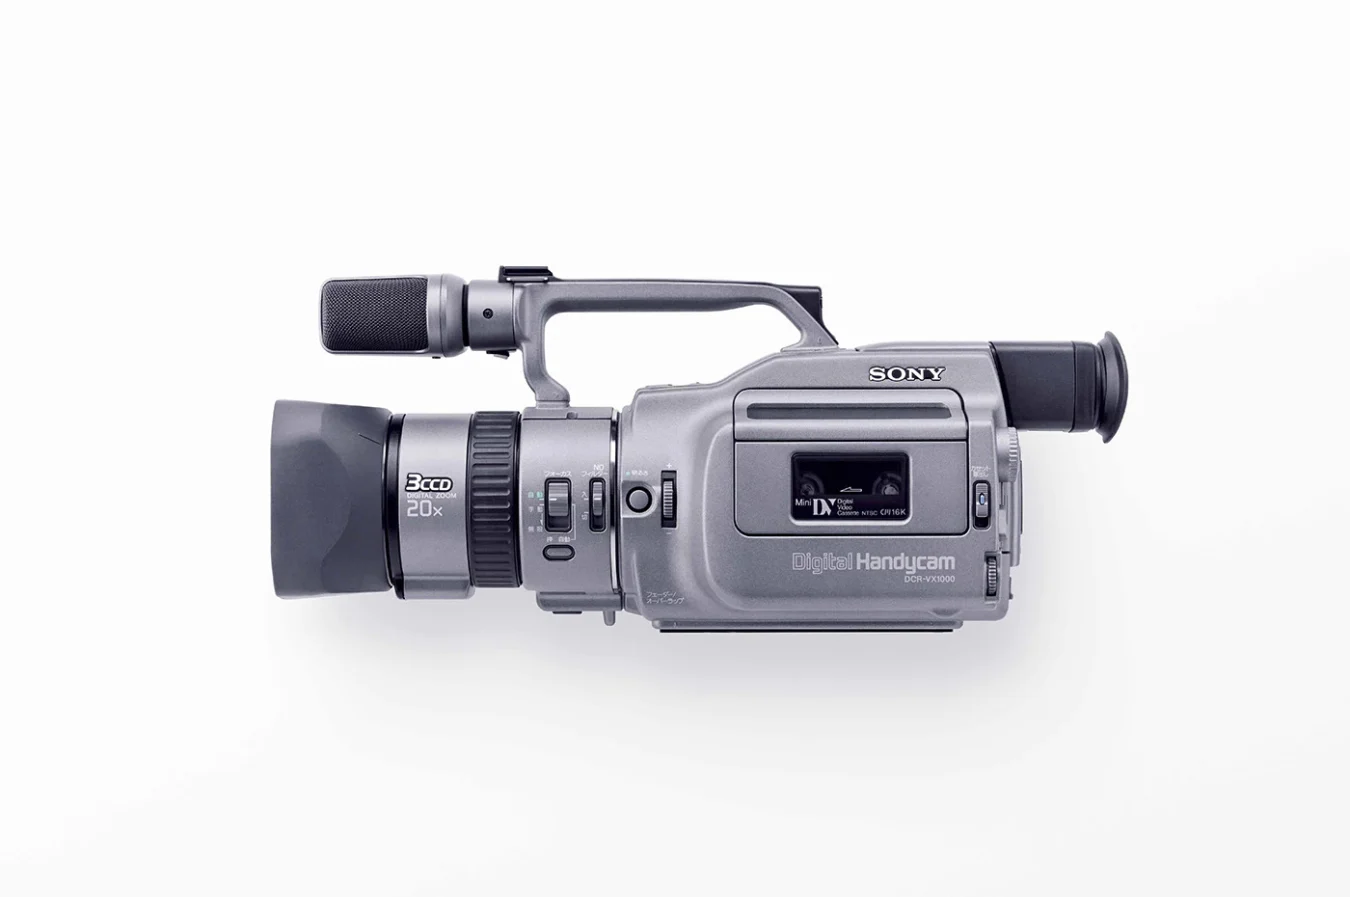 Sony's first consumer digital camcorder, the VX1000, is featured in a promotional image.